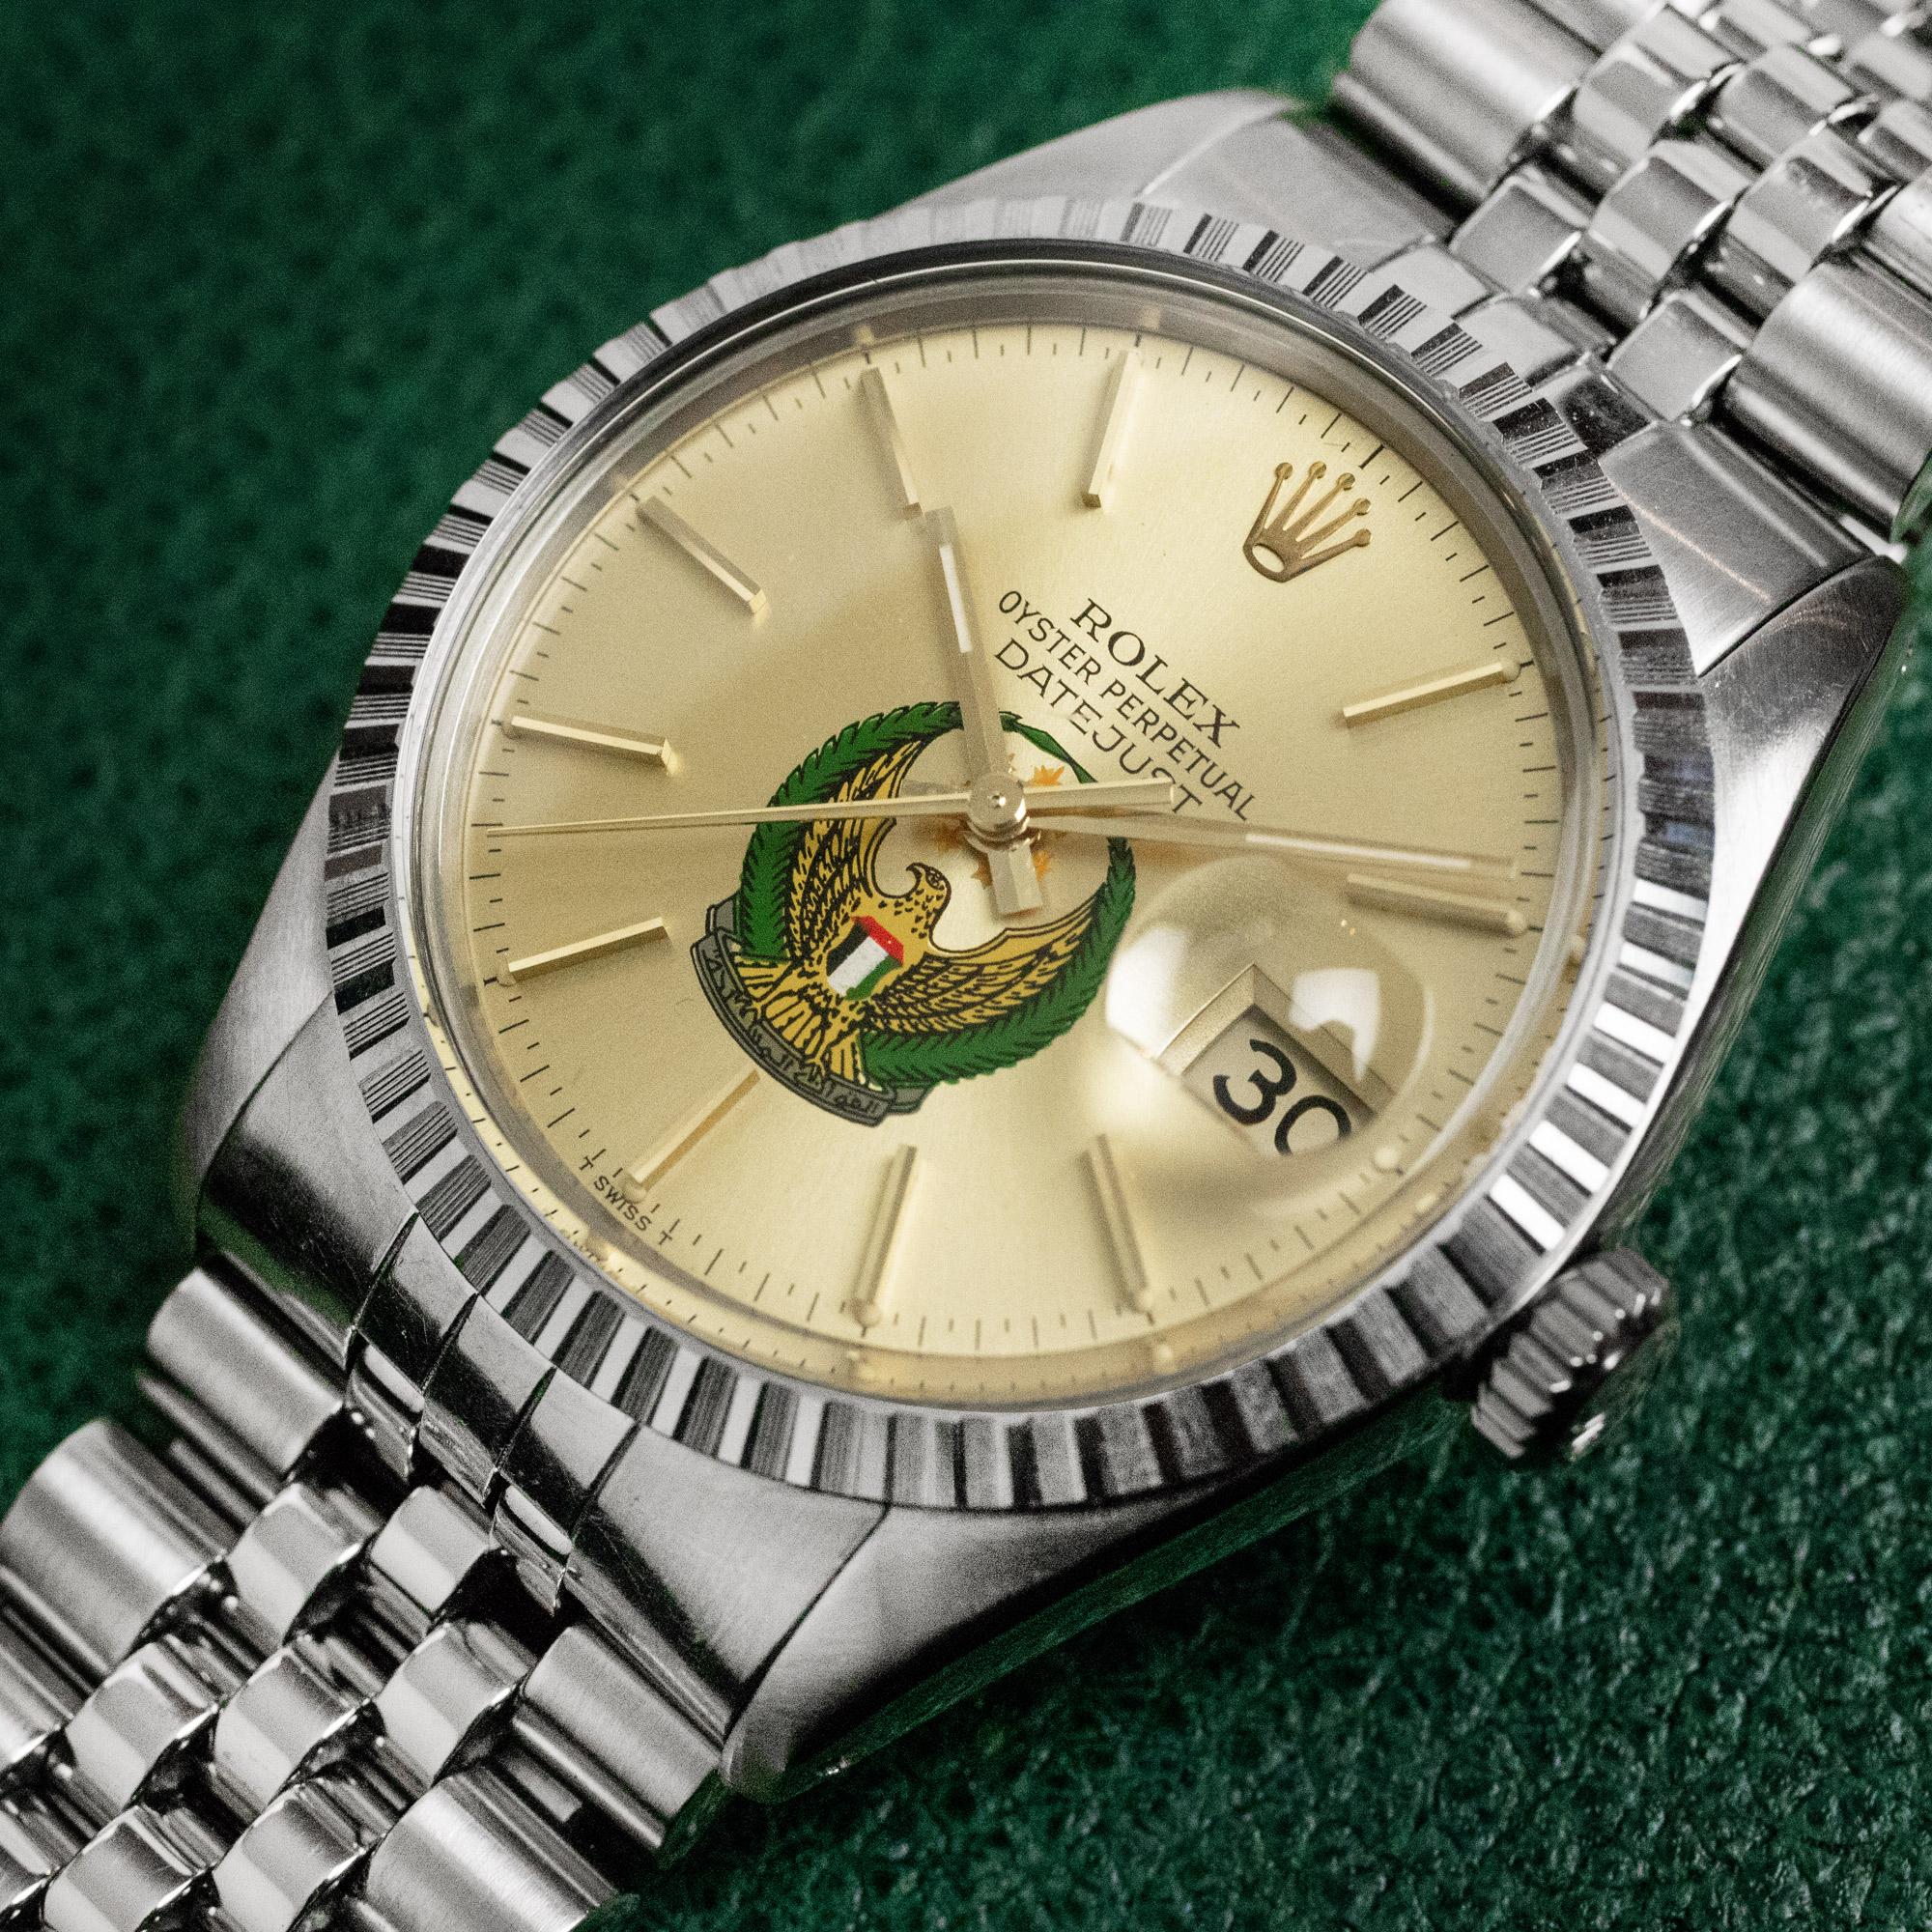 This Rolex Datejust from stainless steel with a stainless steel, engine-turned bezel and quickset function calibre 3035 – that we have on offer dates back to 1978 and has a champange-gold dial with the UAE (United Arab Emirates) Armed Forces logo